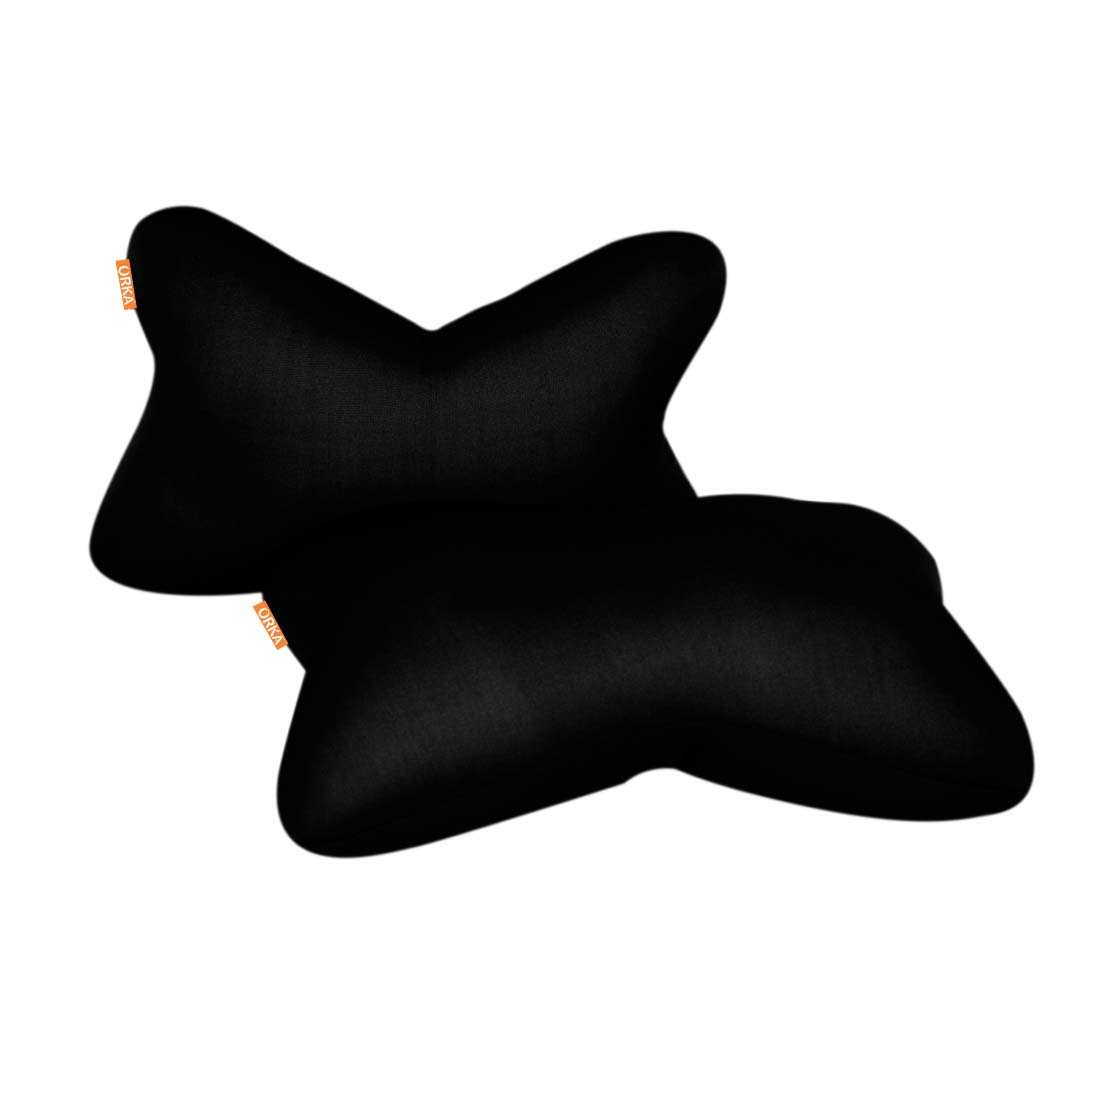 ORKA Classic Car Neckrest Pillow Filled With Microbeads [Pack Of 2] - Black  